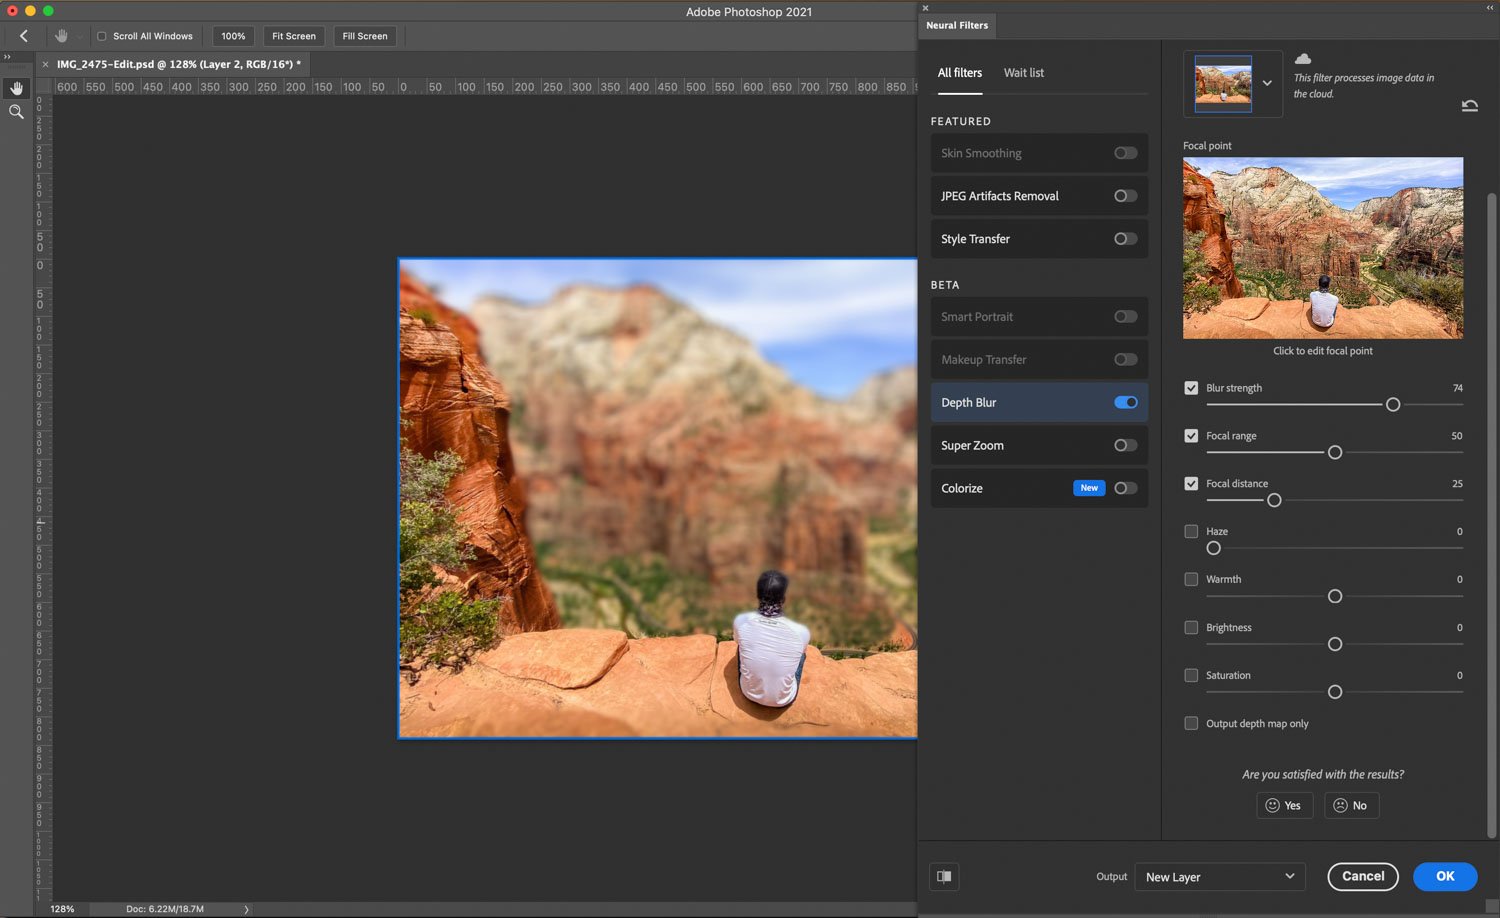 Adobe Updates Neural Filters, Brings ‘Portrait Mode’ To